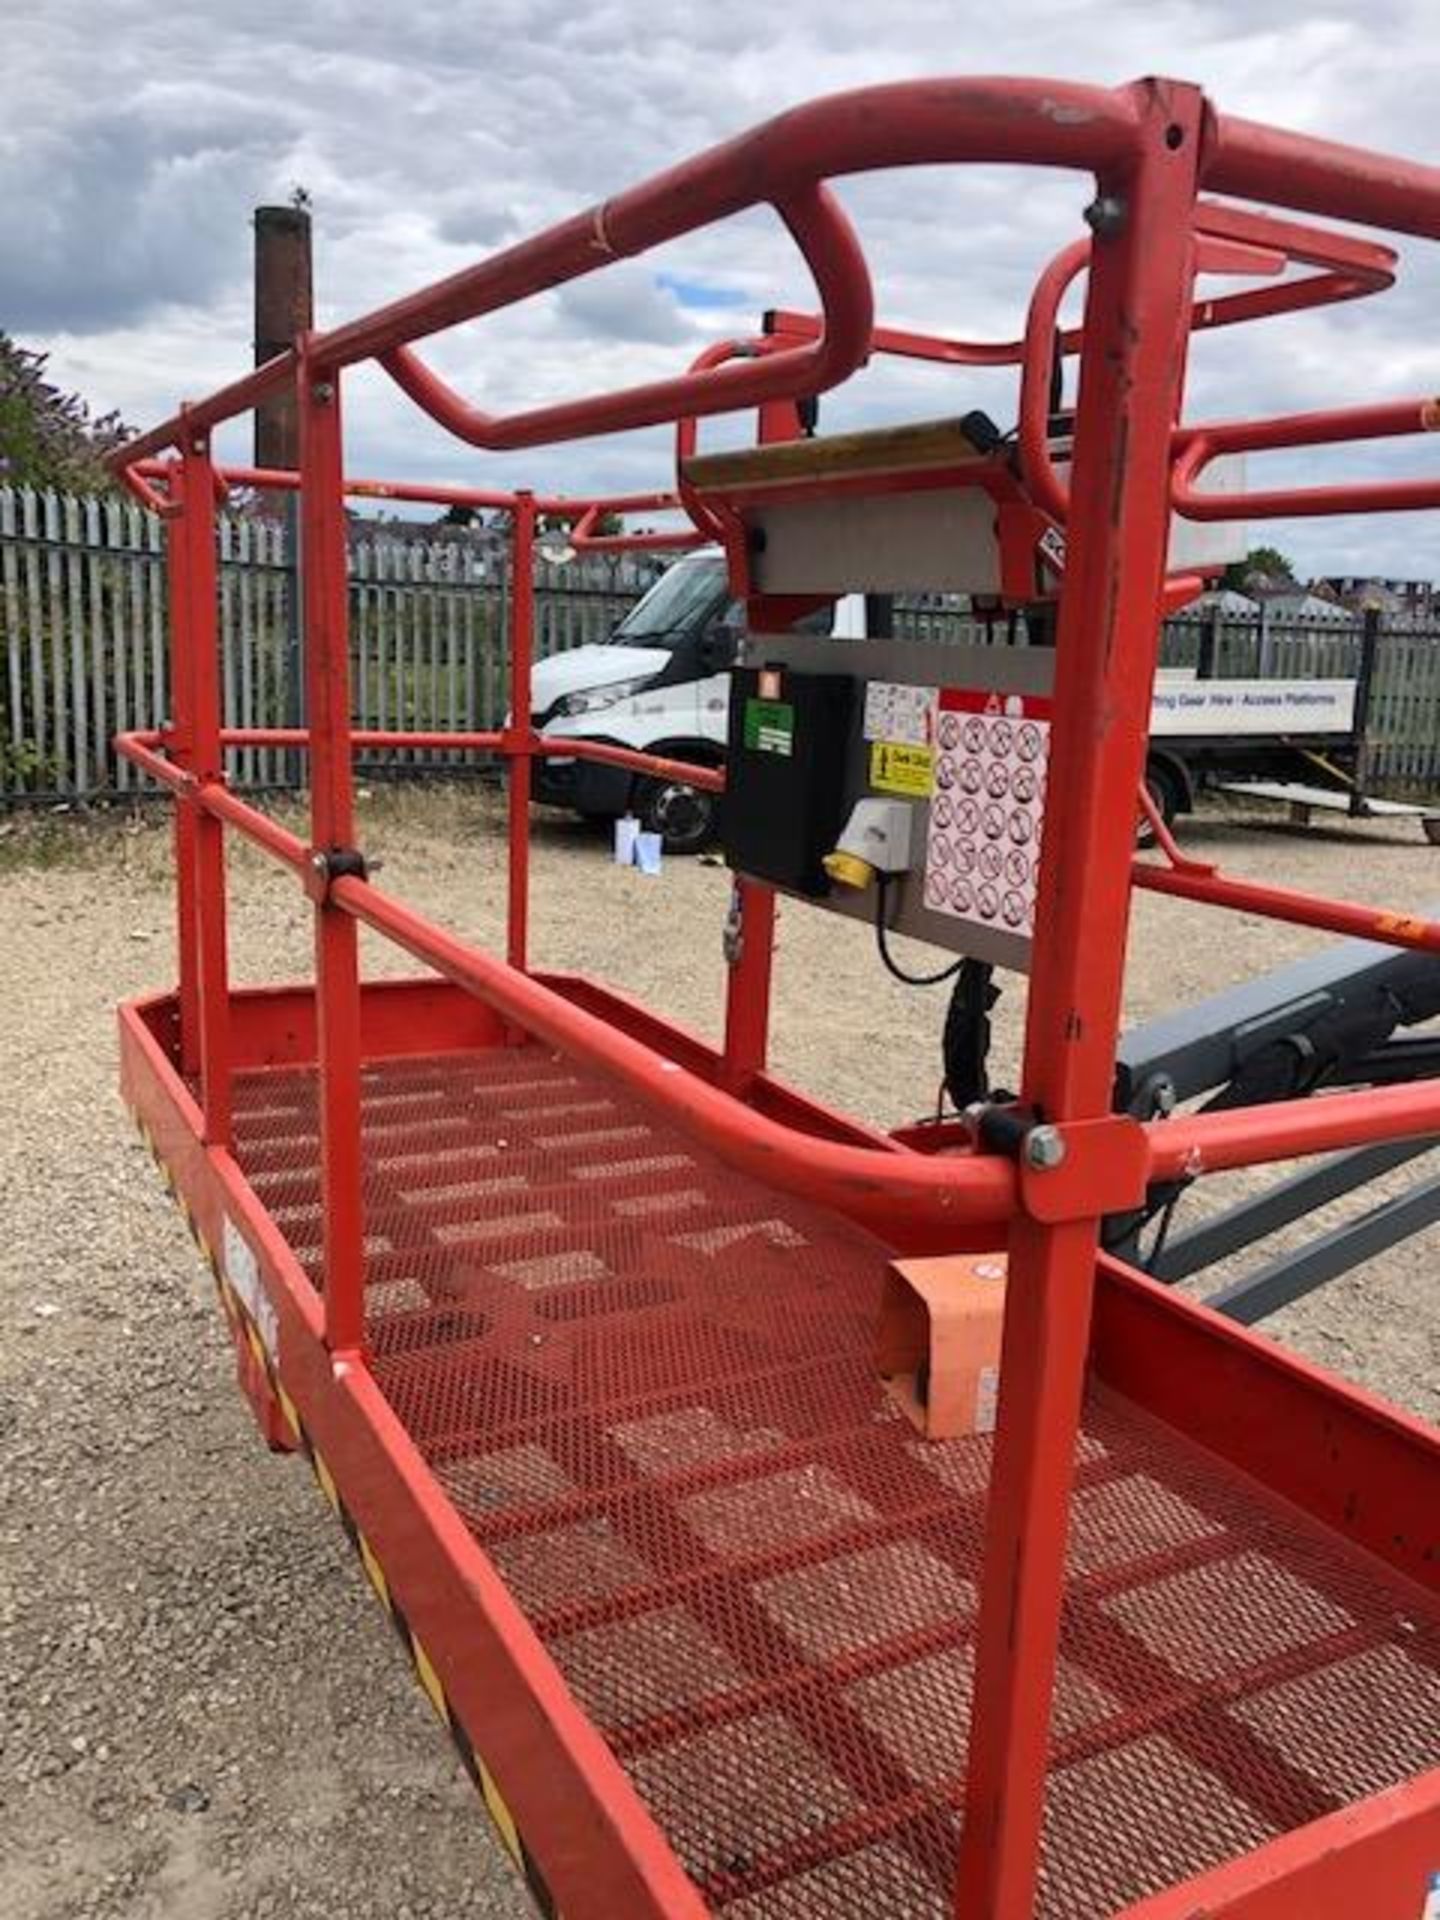 CHERRY PICKER SJ86T ACCESS PLATFORM MEWP, ONLY 260 HOURS FROM NEW, BUILT IN 2018 BUT A 2019 MODEL - Image 7 of 8